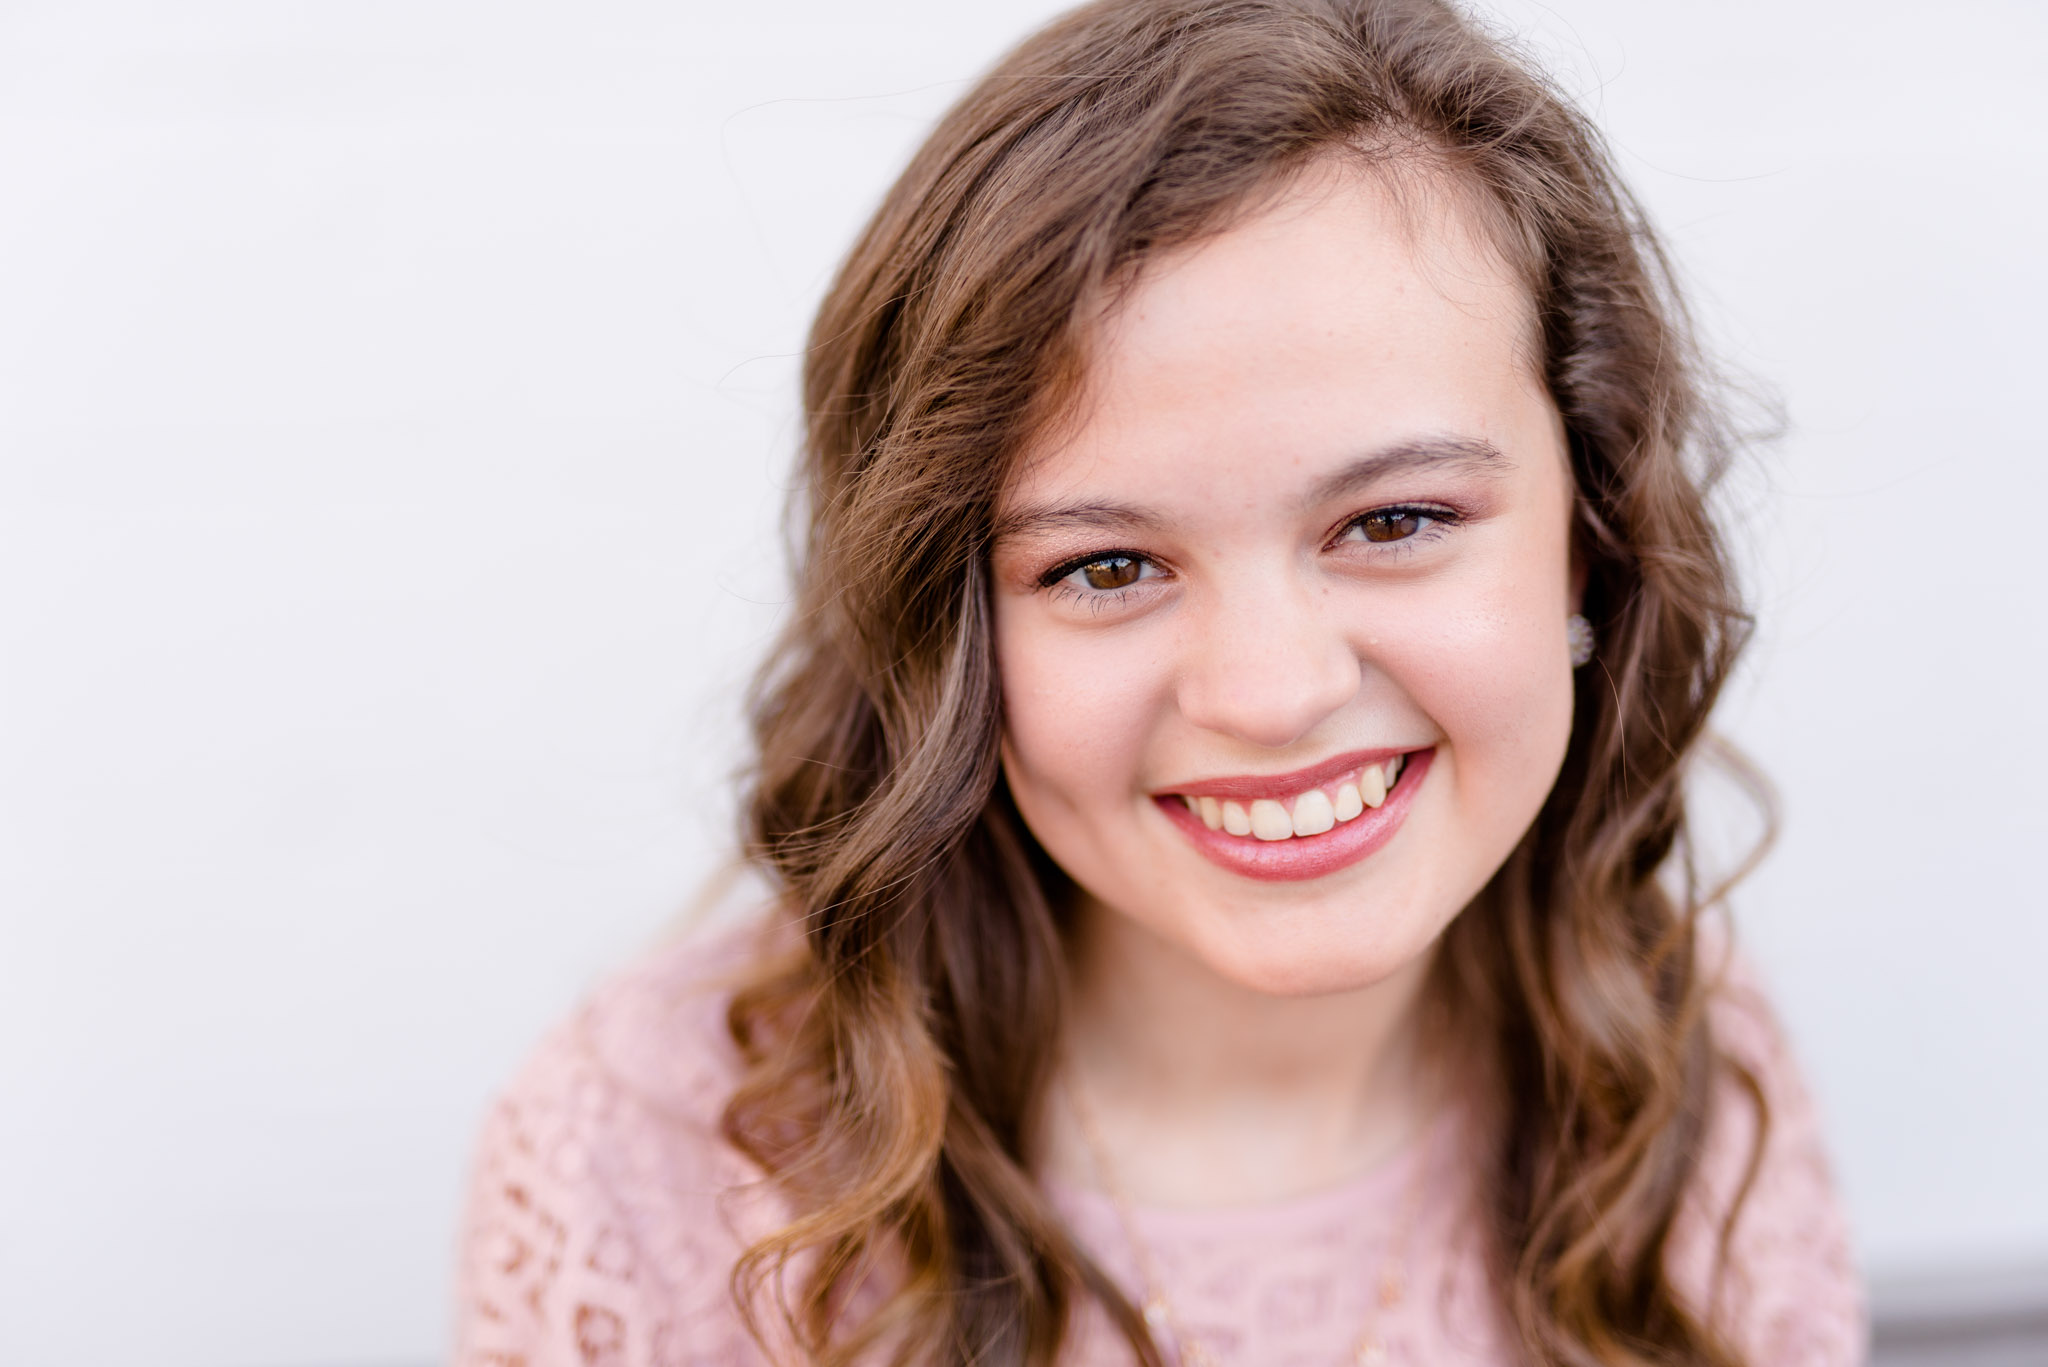 Senior girl headshot with white wall in background.